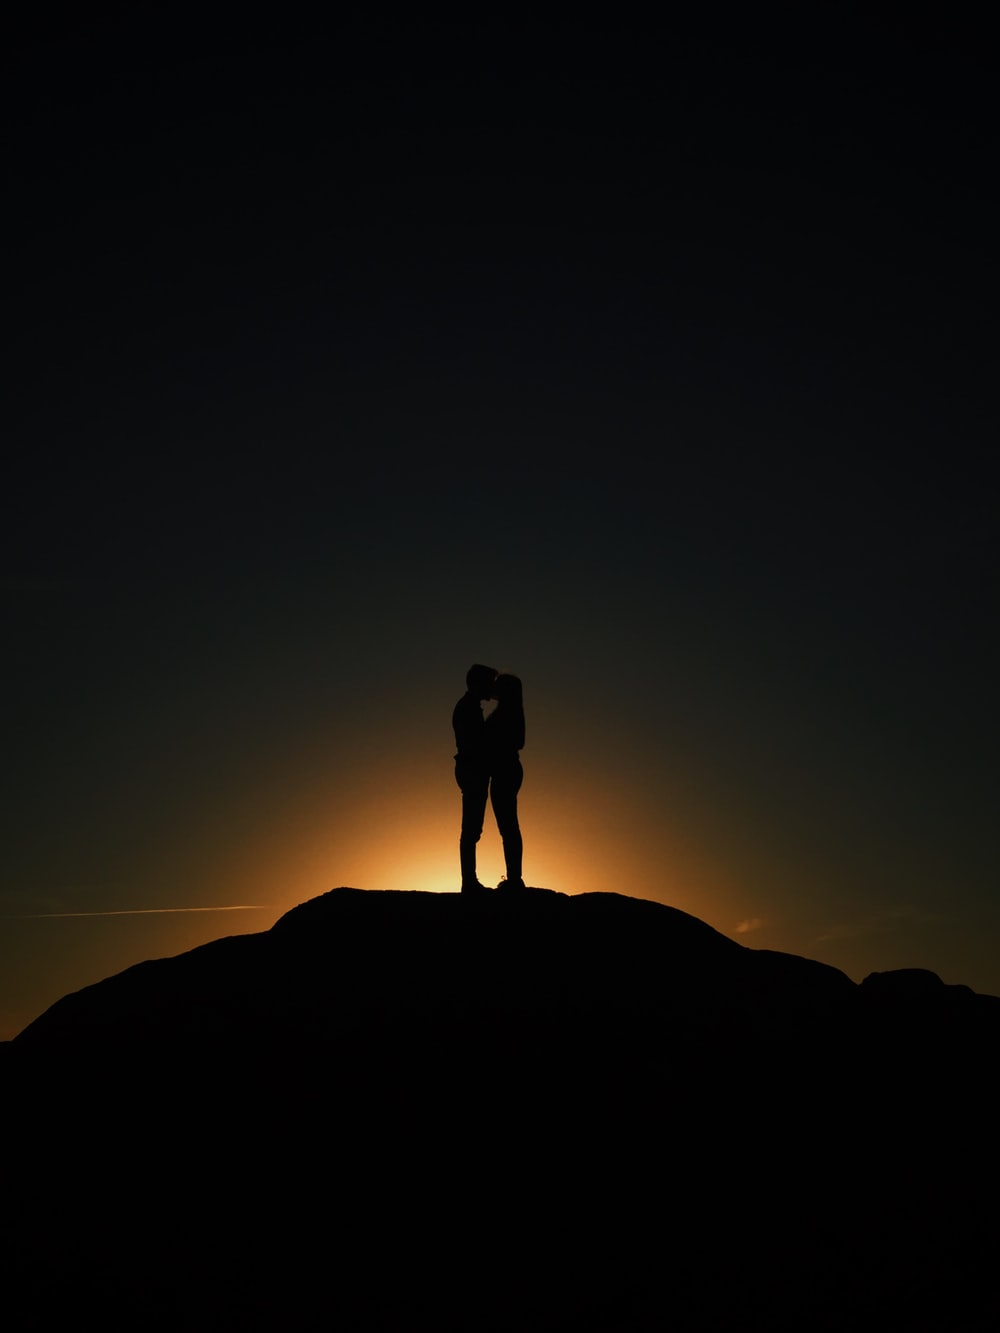 Couple Shadow Picture. Download Free Image